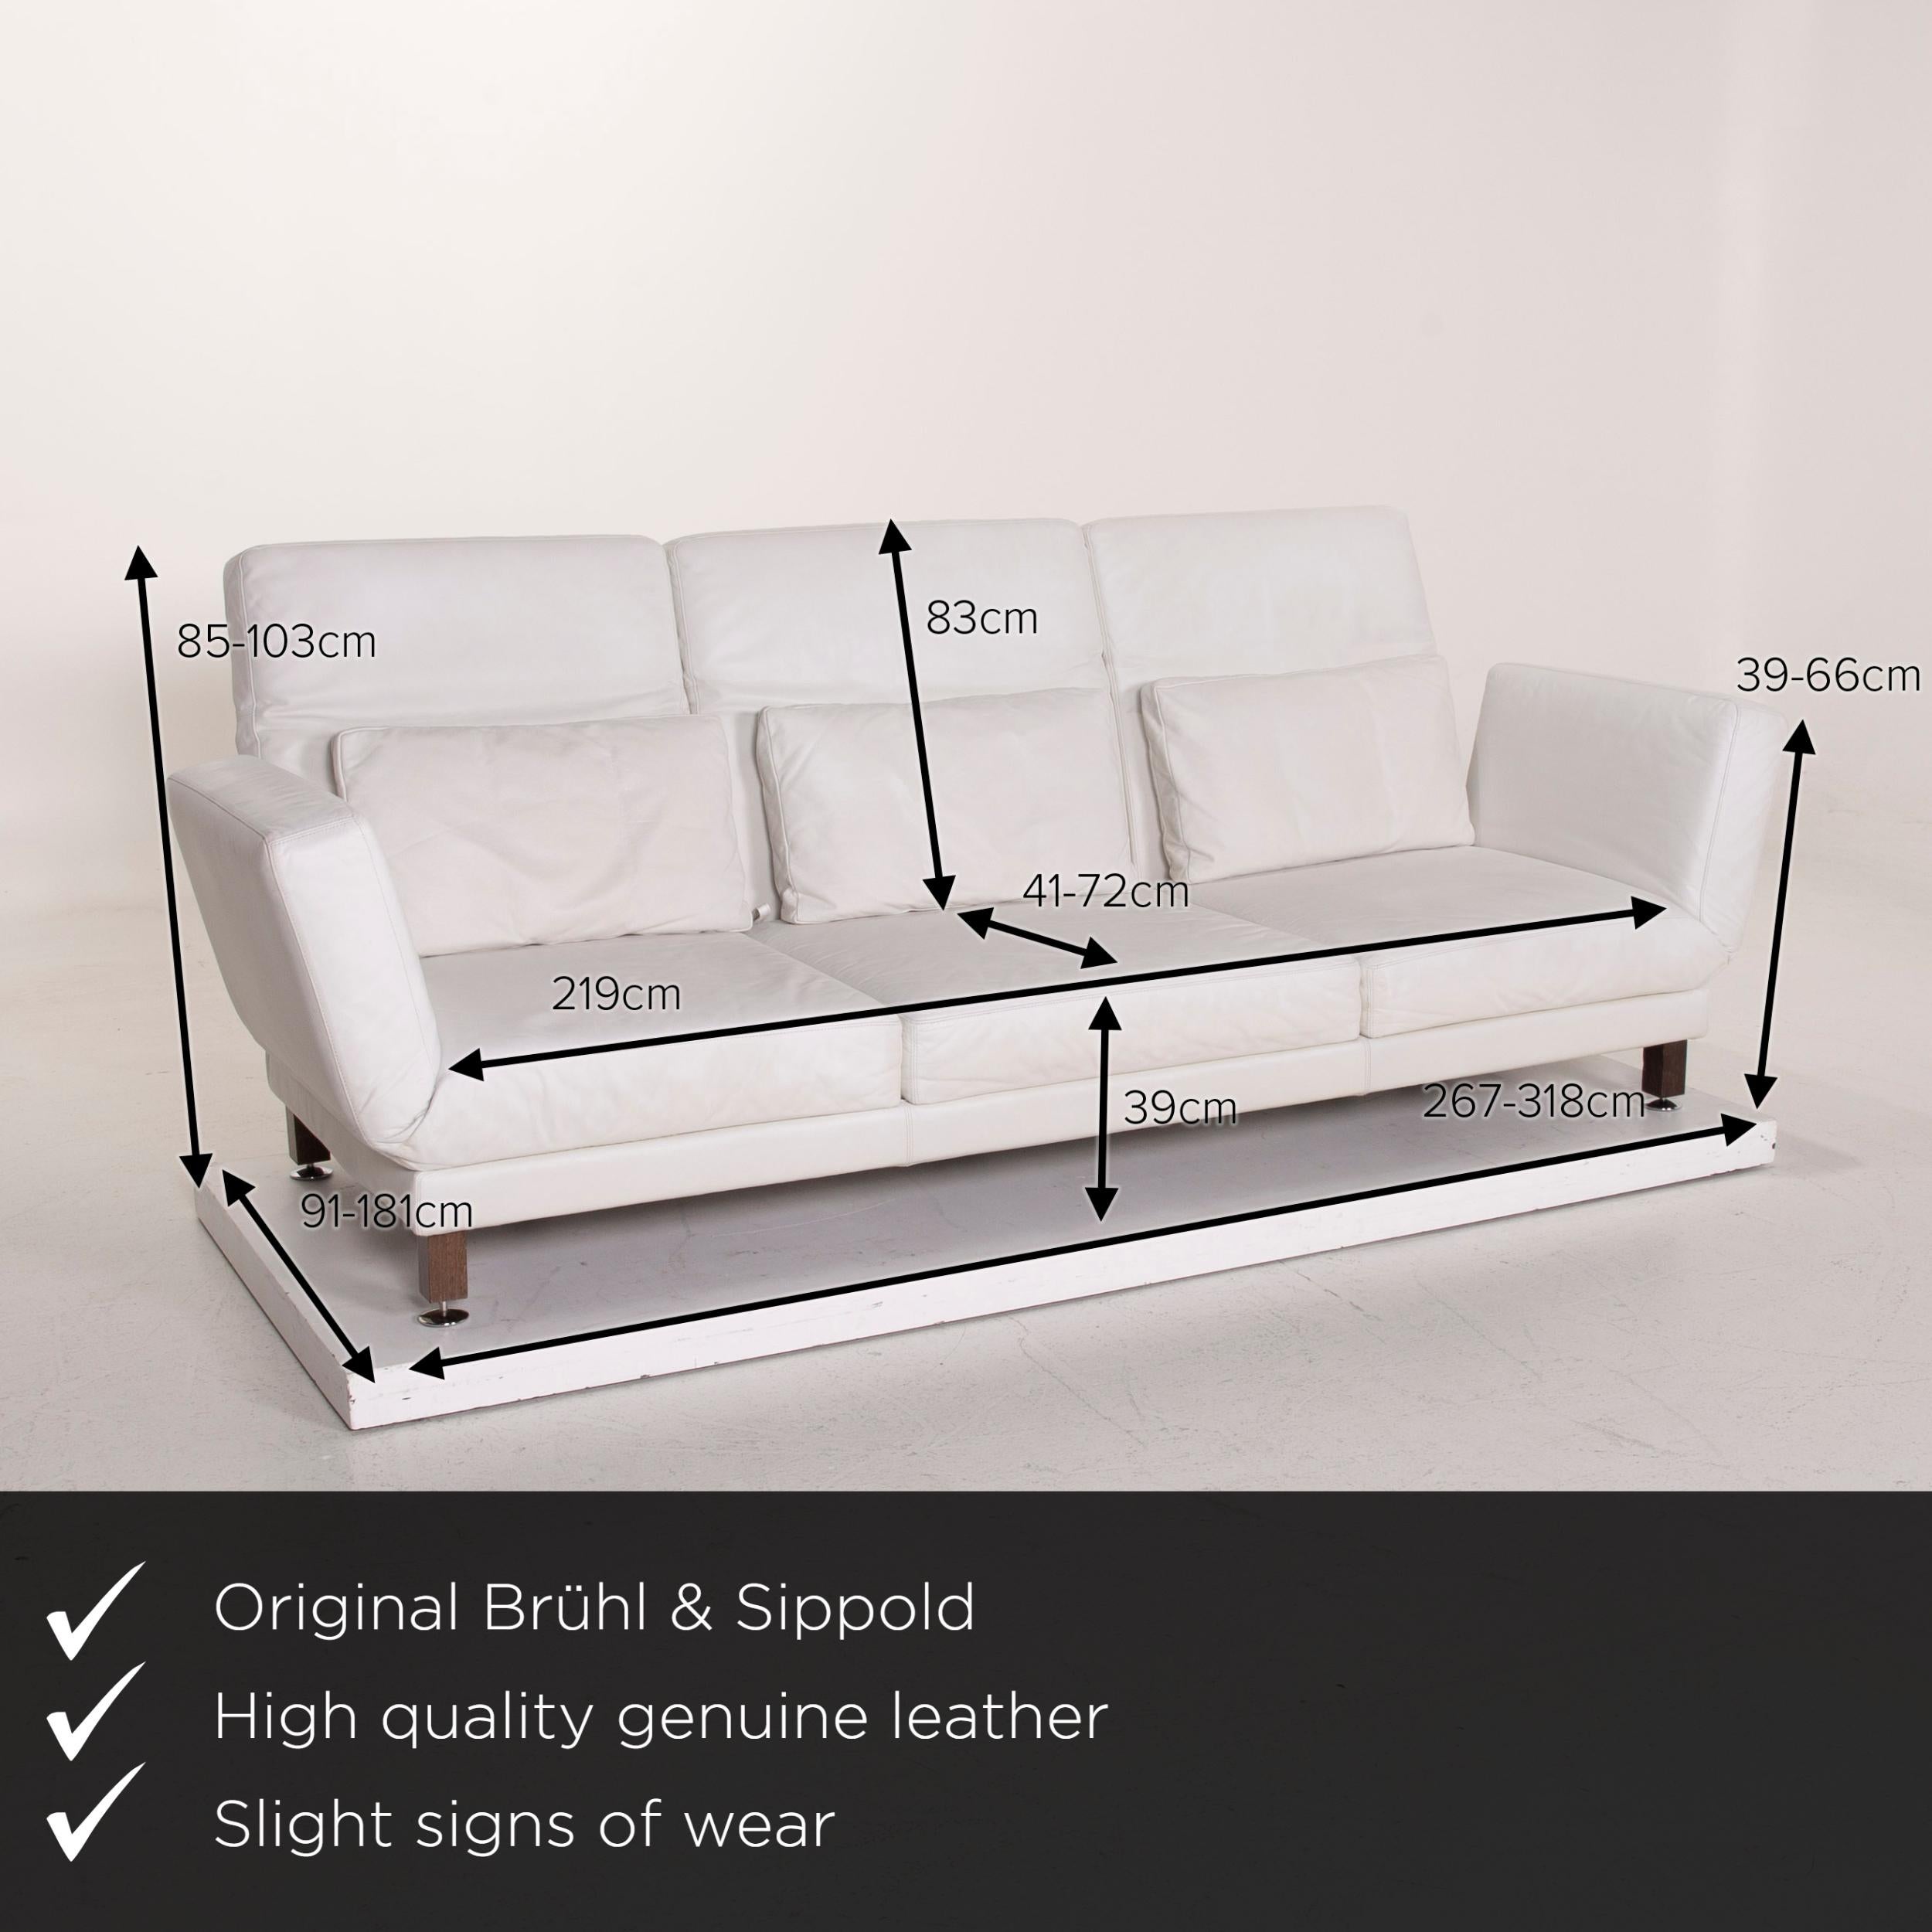 We present to you a Brühl & Sippold Moule leather sofa white three-seat relaxation function.

 

 Product measurements in centimetres:
 

 depth: 91
 width: 267
 height: 103
 seat height: 39
 rest height: 39
 seat depth: 41
 seat width: